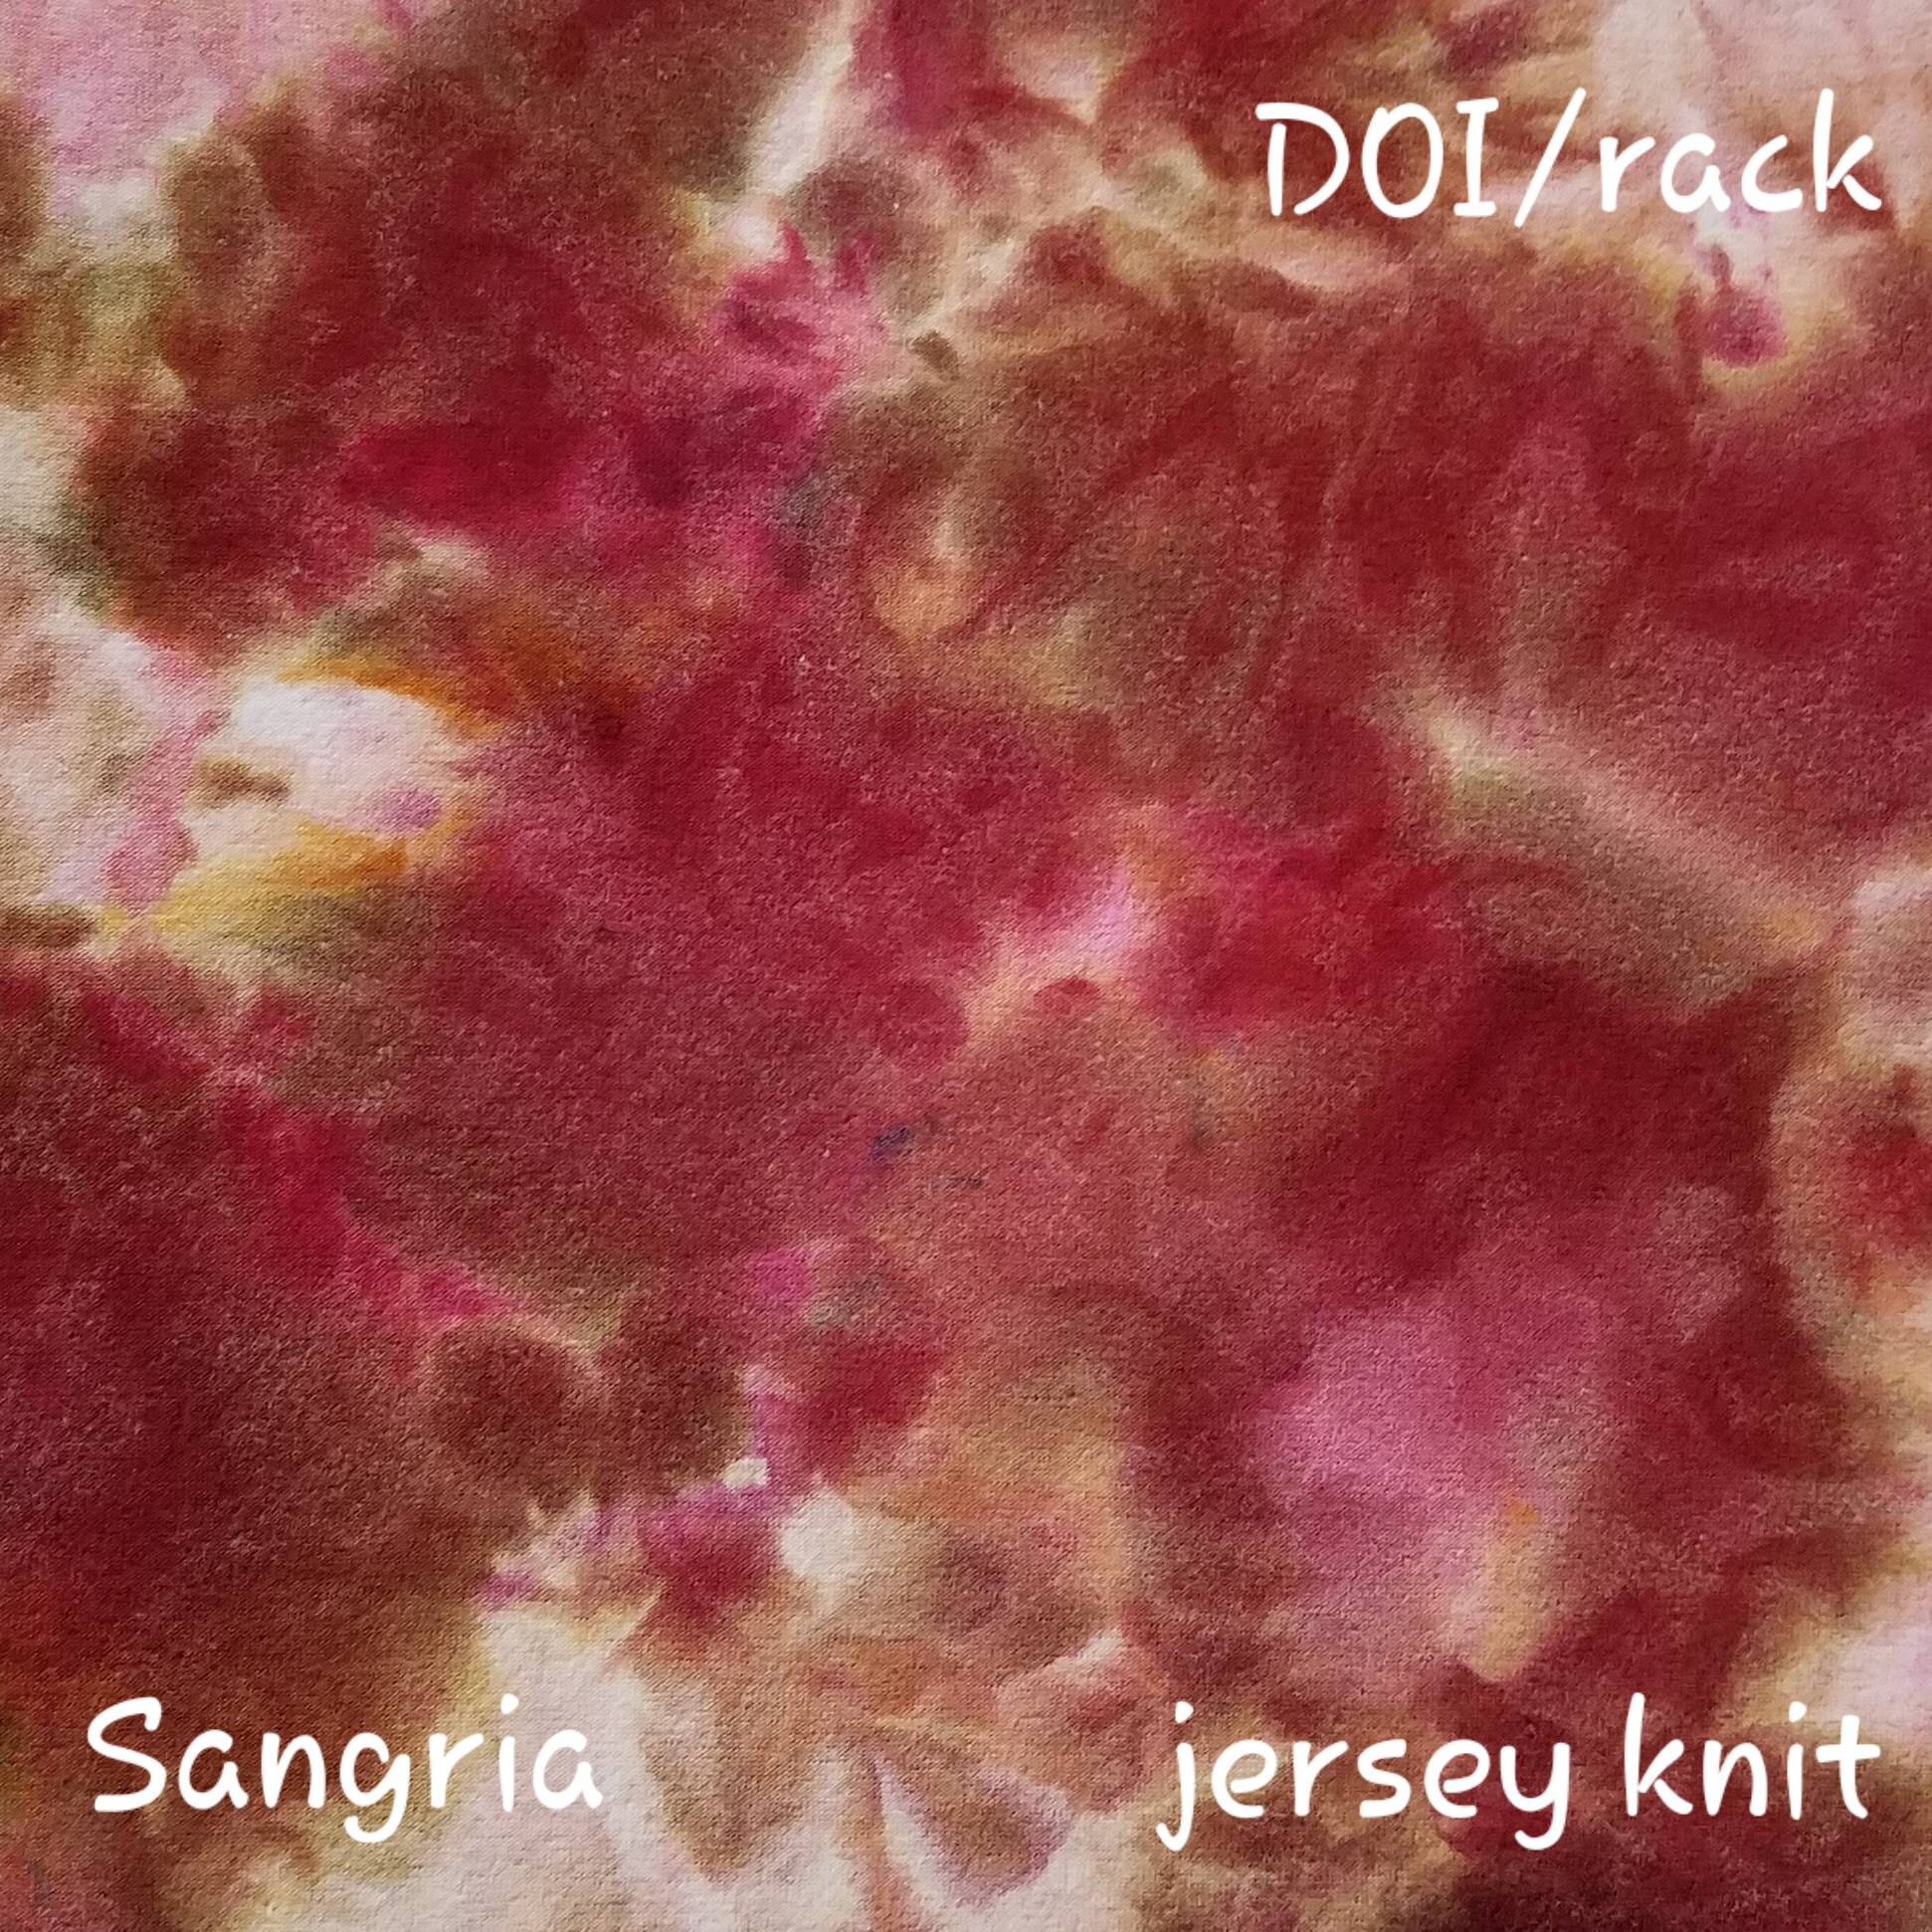 Wood swatch with dharma fiber reactive dyes : r/tiedye